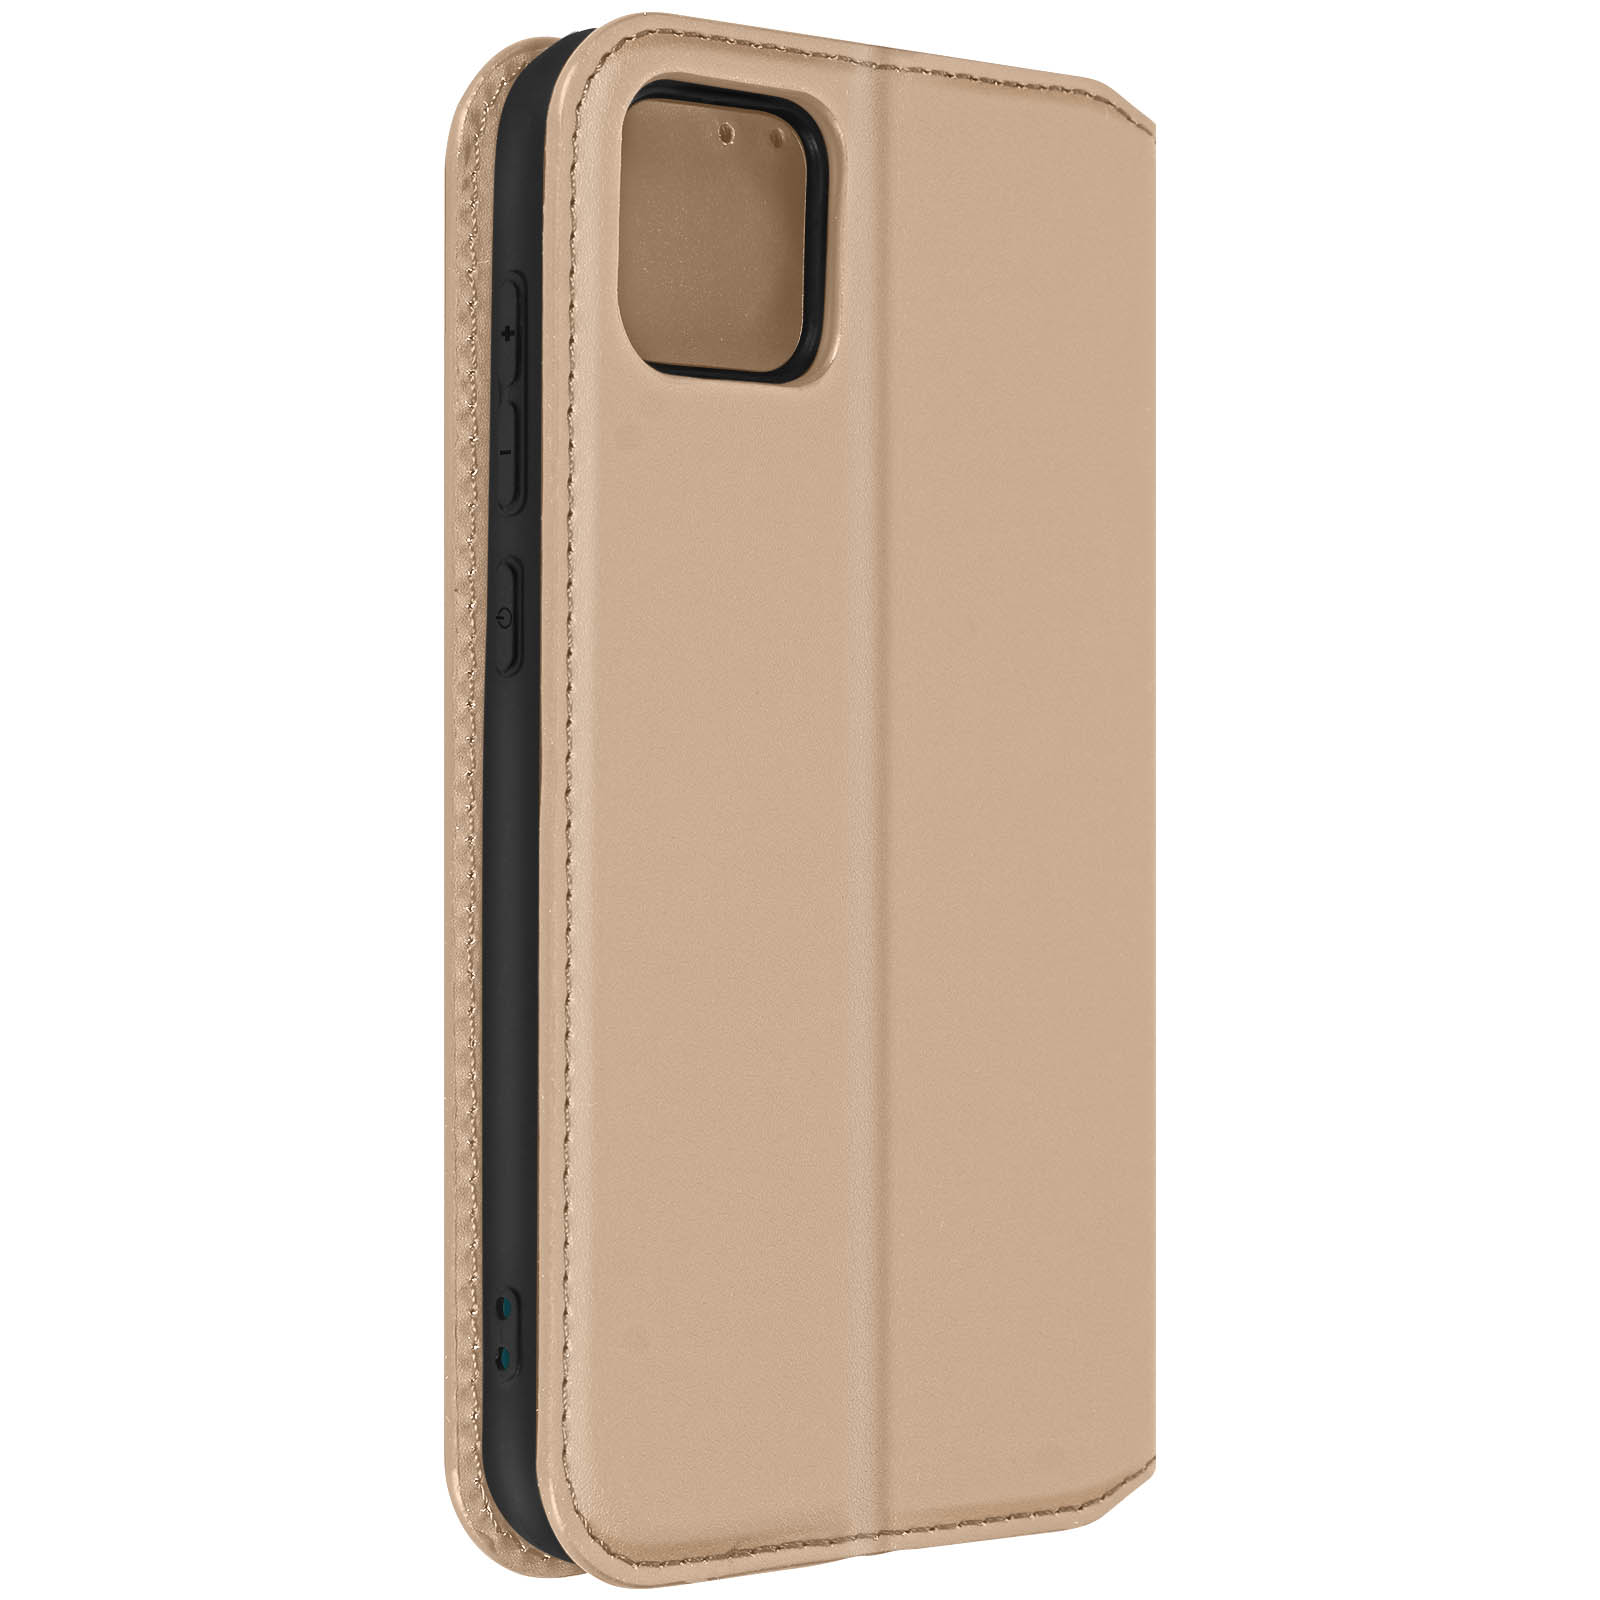 Backcover AVIZAR Bookcover, Y52, Wiko mit Wiko, Gold Classic Magnetklappe Edition, Series,